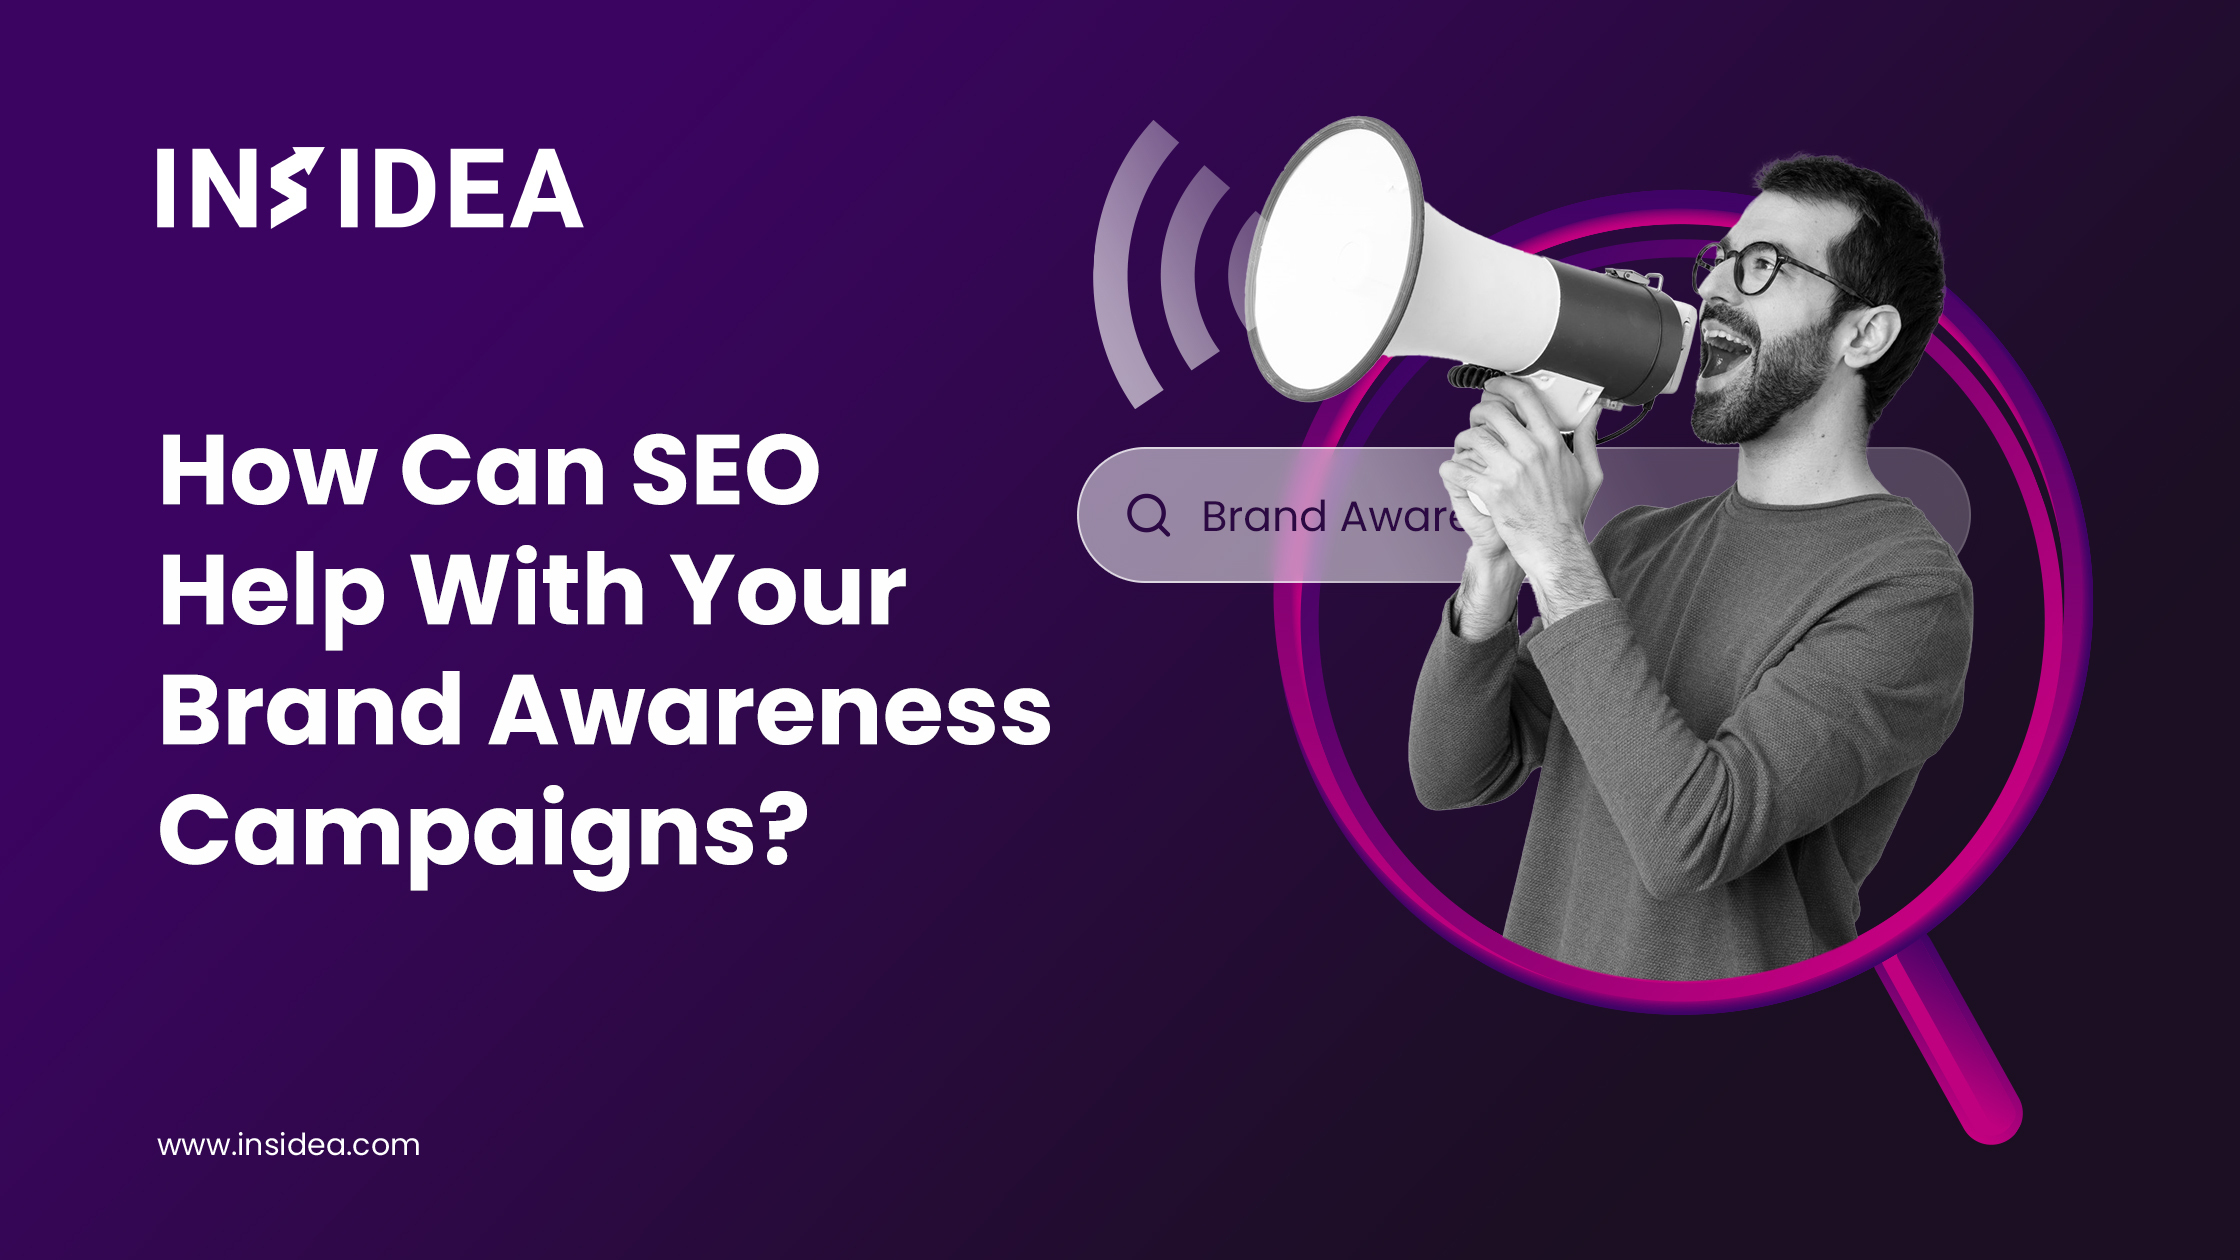 How Can SEO Help With Your Brand Awareness Campaigns?